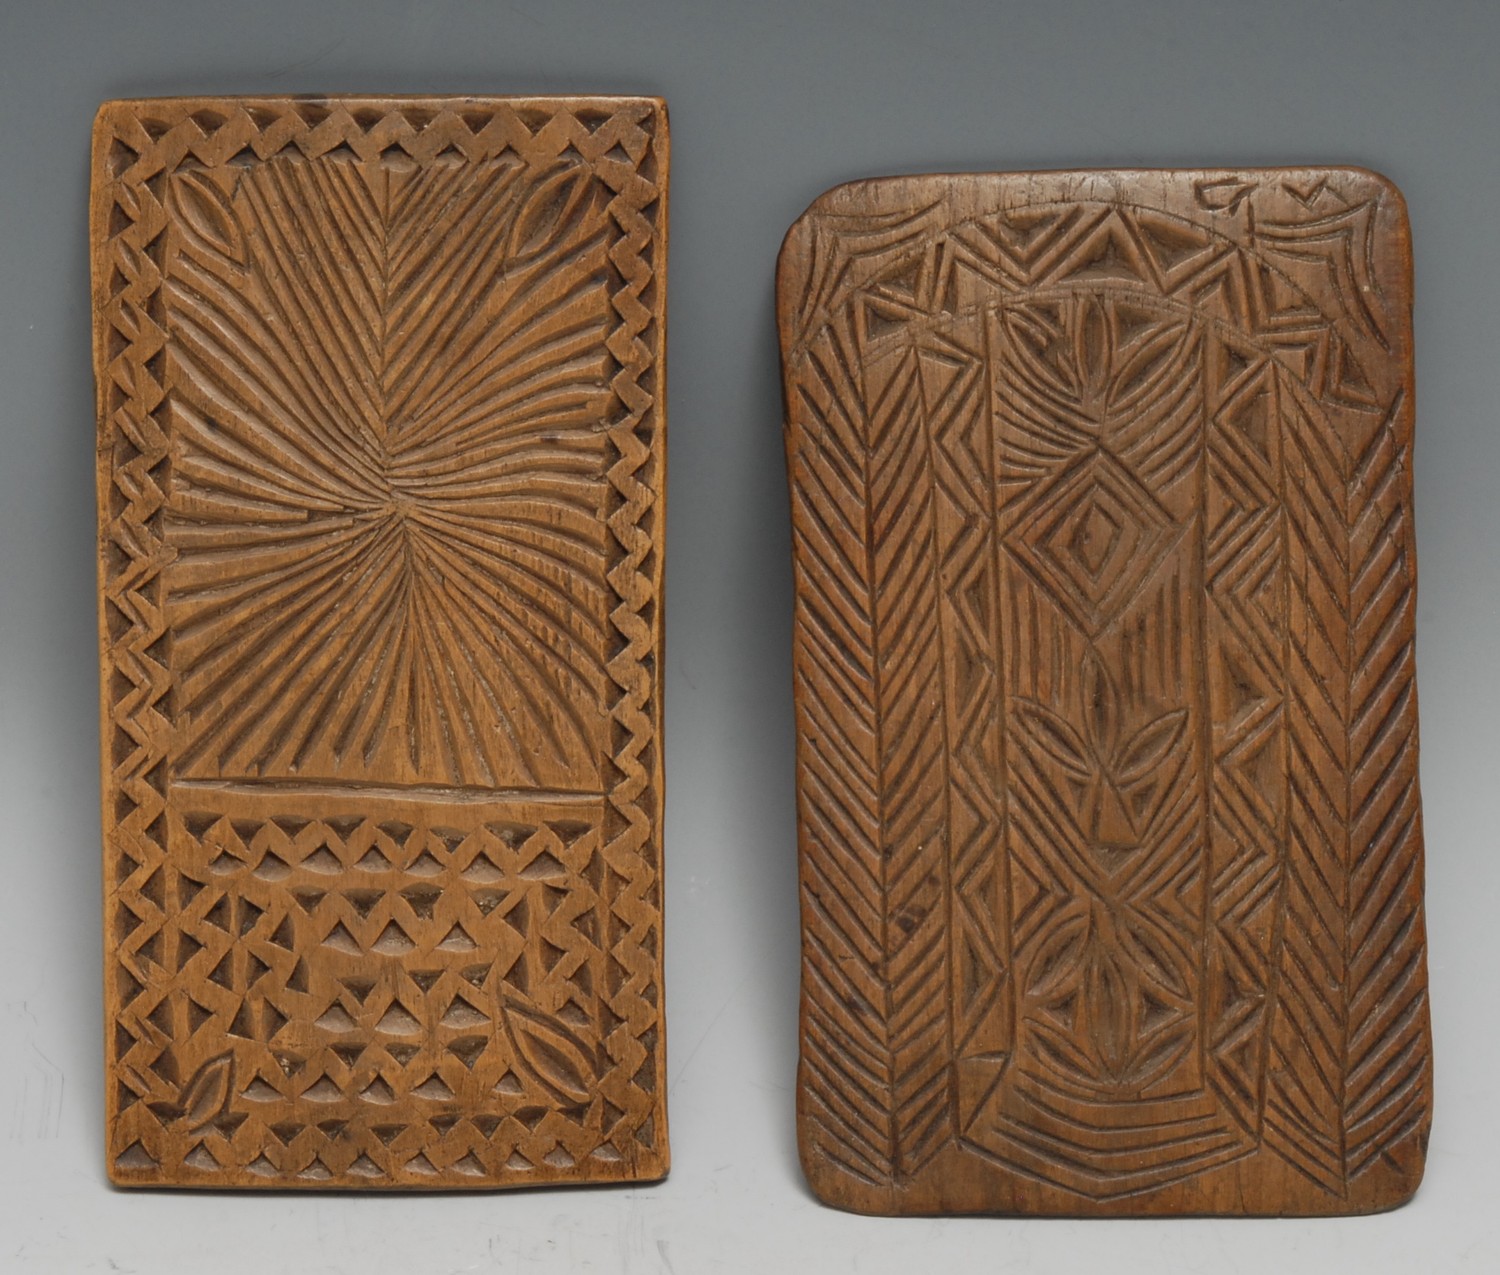 Treen - a 19th century chip-carved love token, probably Scandinavian, decorated with daisy-wheels